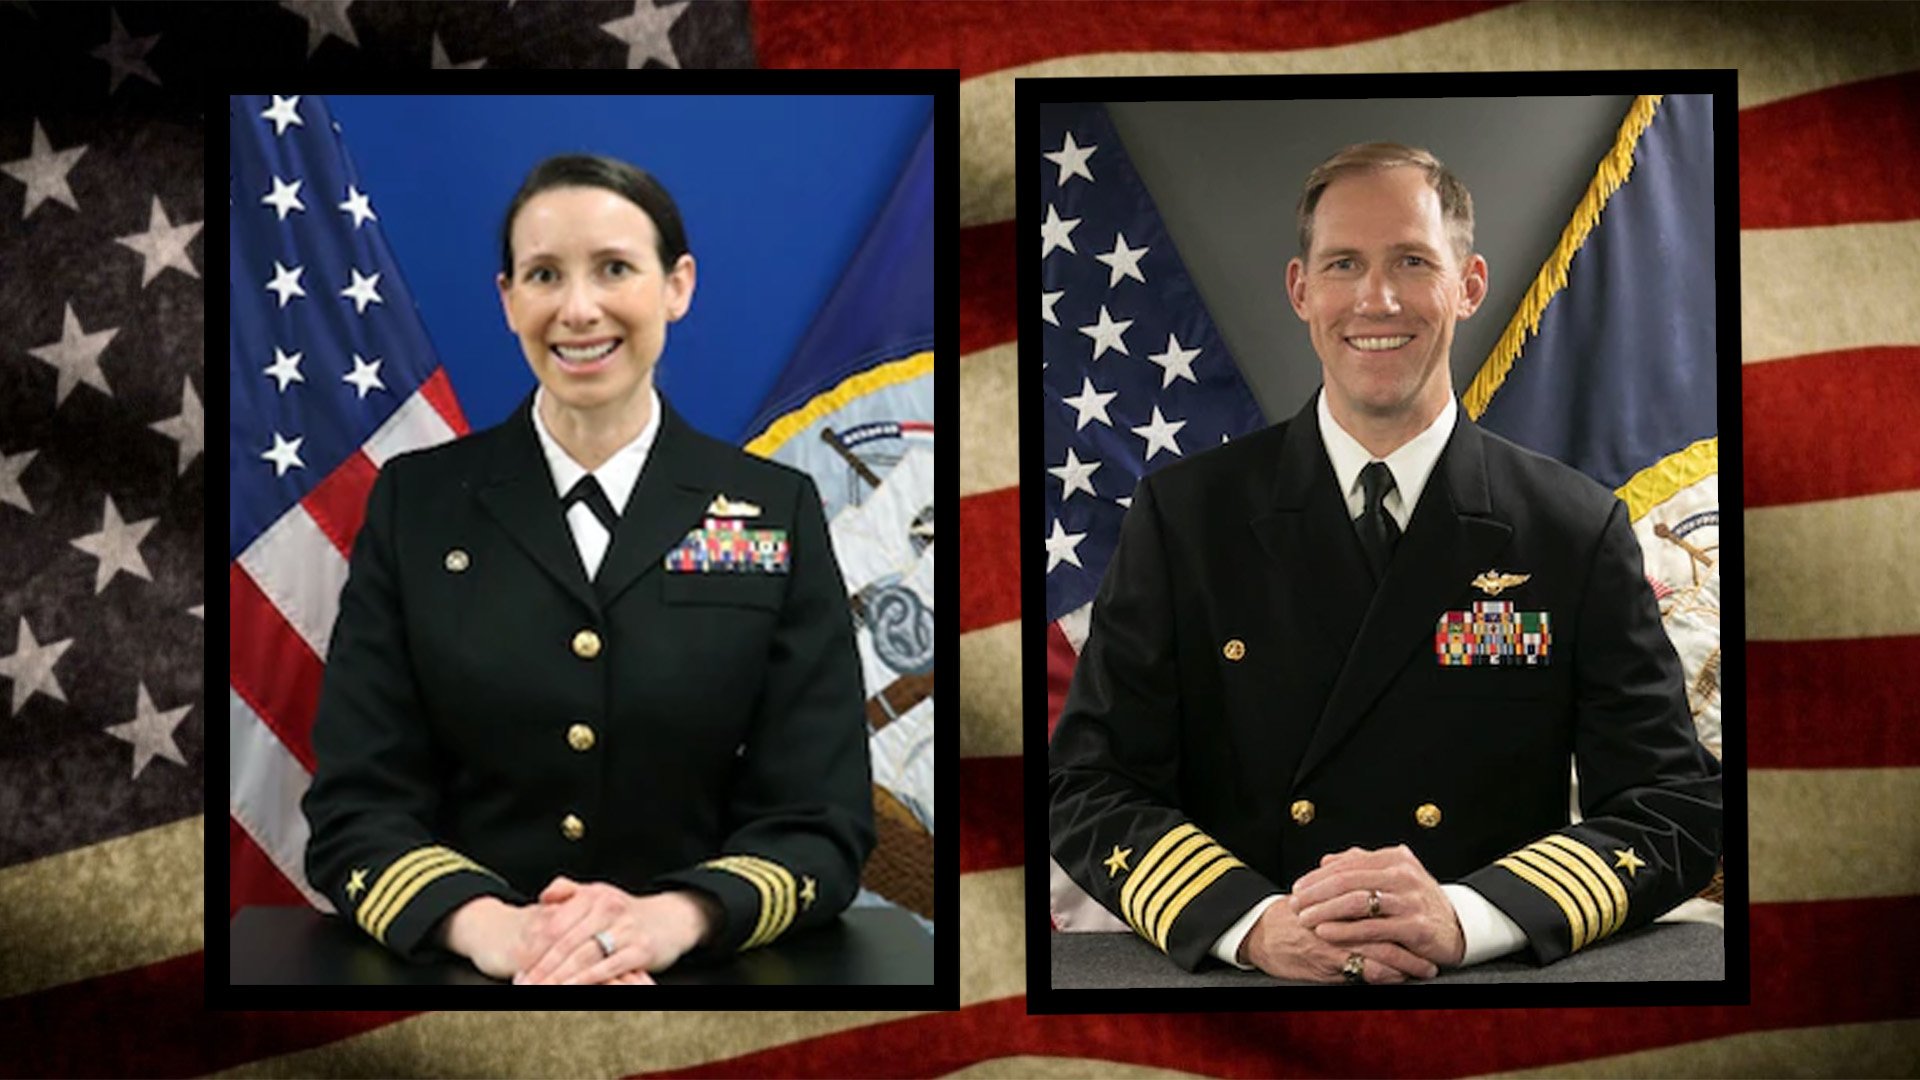 On Jan. 18, 2023, US Navy leaders relieved Cmdr. Alexa Jenkins, the commanding officer of the Arleigh Burke-class guided-missile destroyer Carney, and Capt. Michael D. Nordeen, the commanding officer of the San Antonio-class amphibious transport dock Mesa Verde. Coffee or Die Magazine composite.